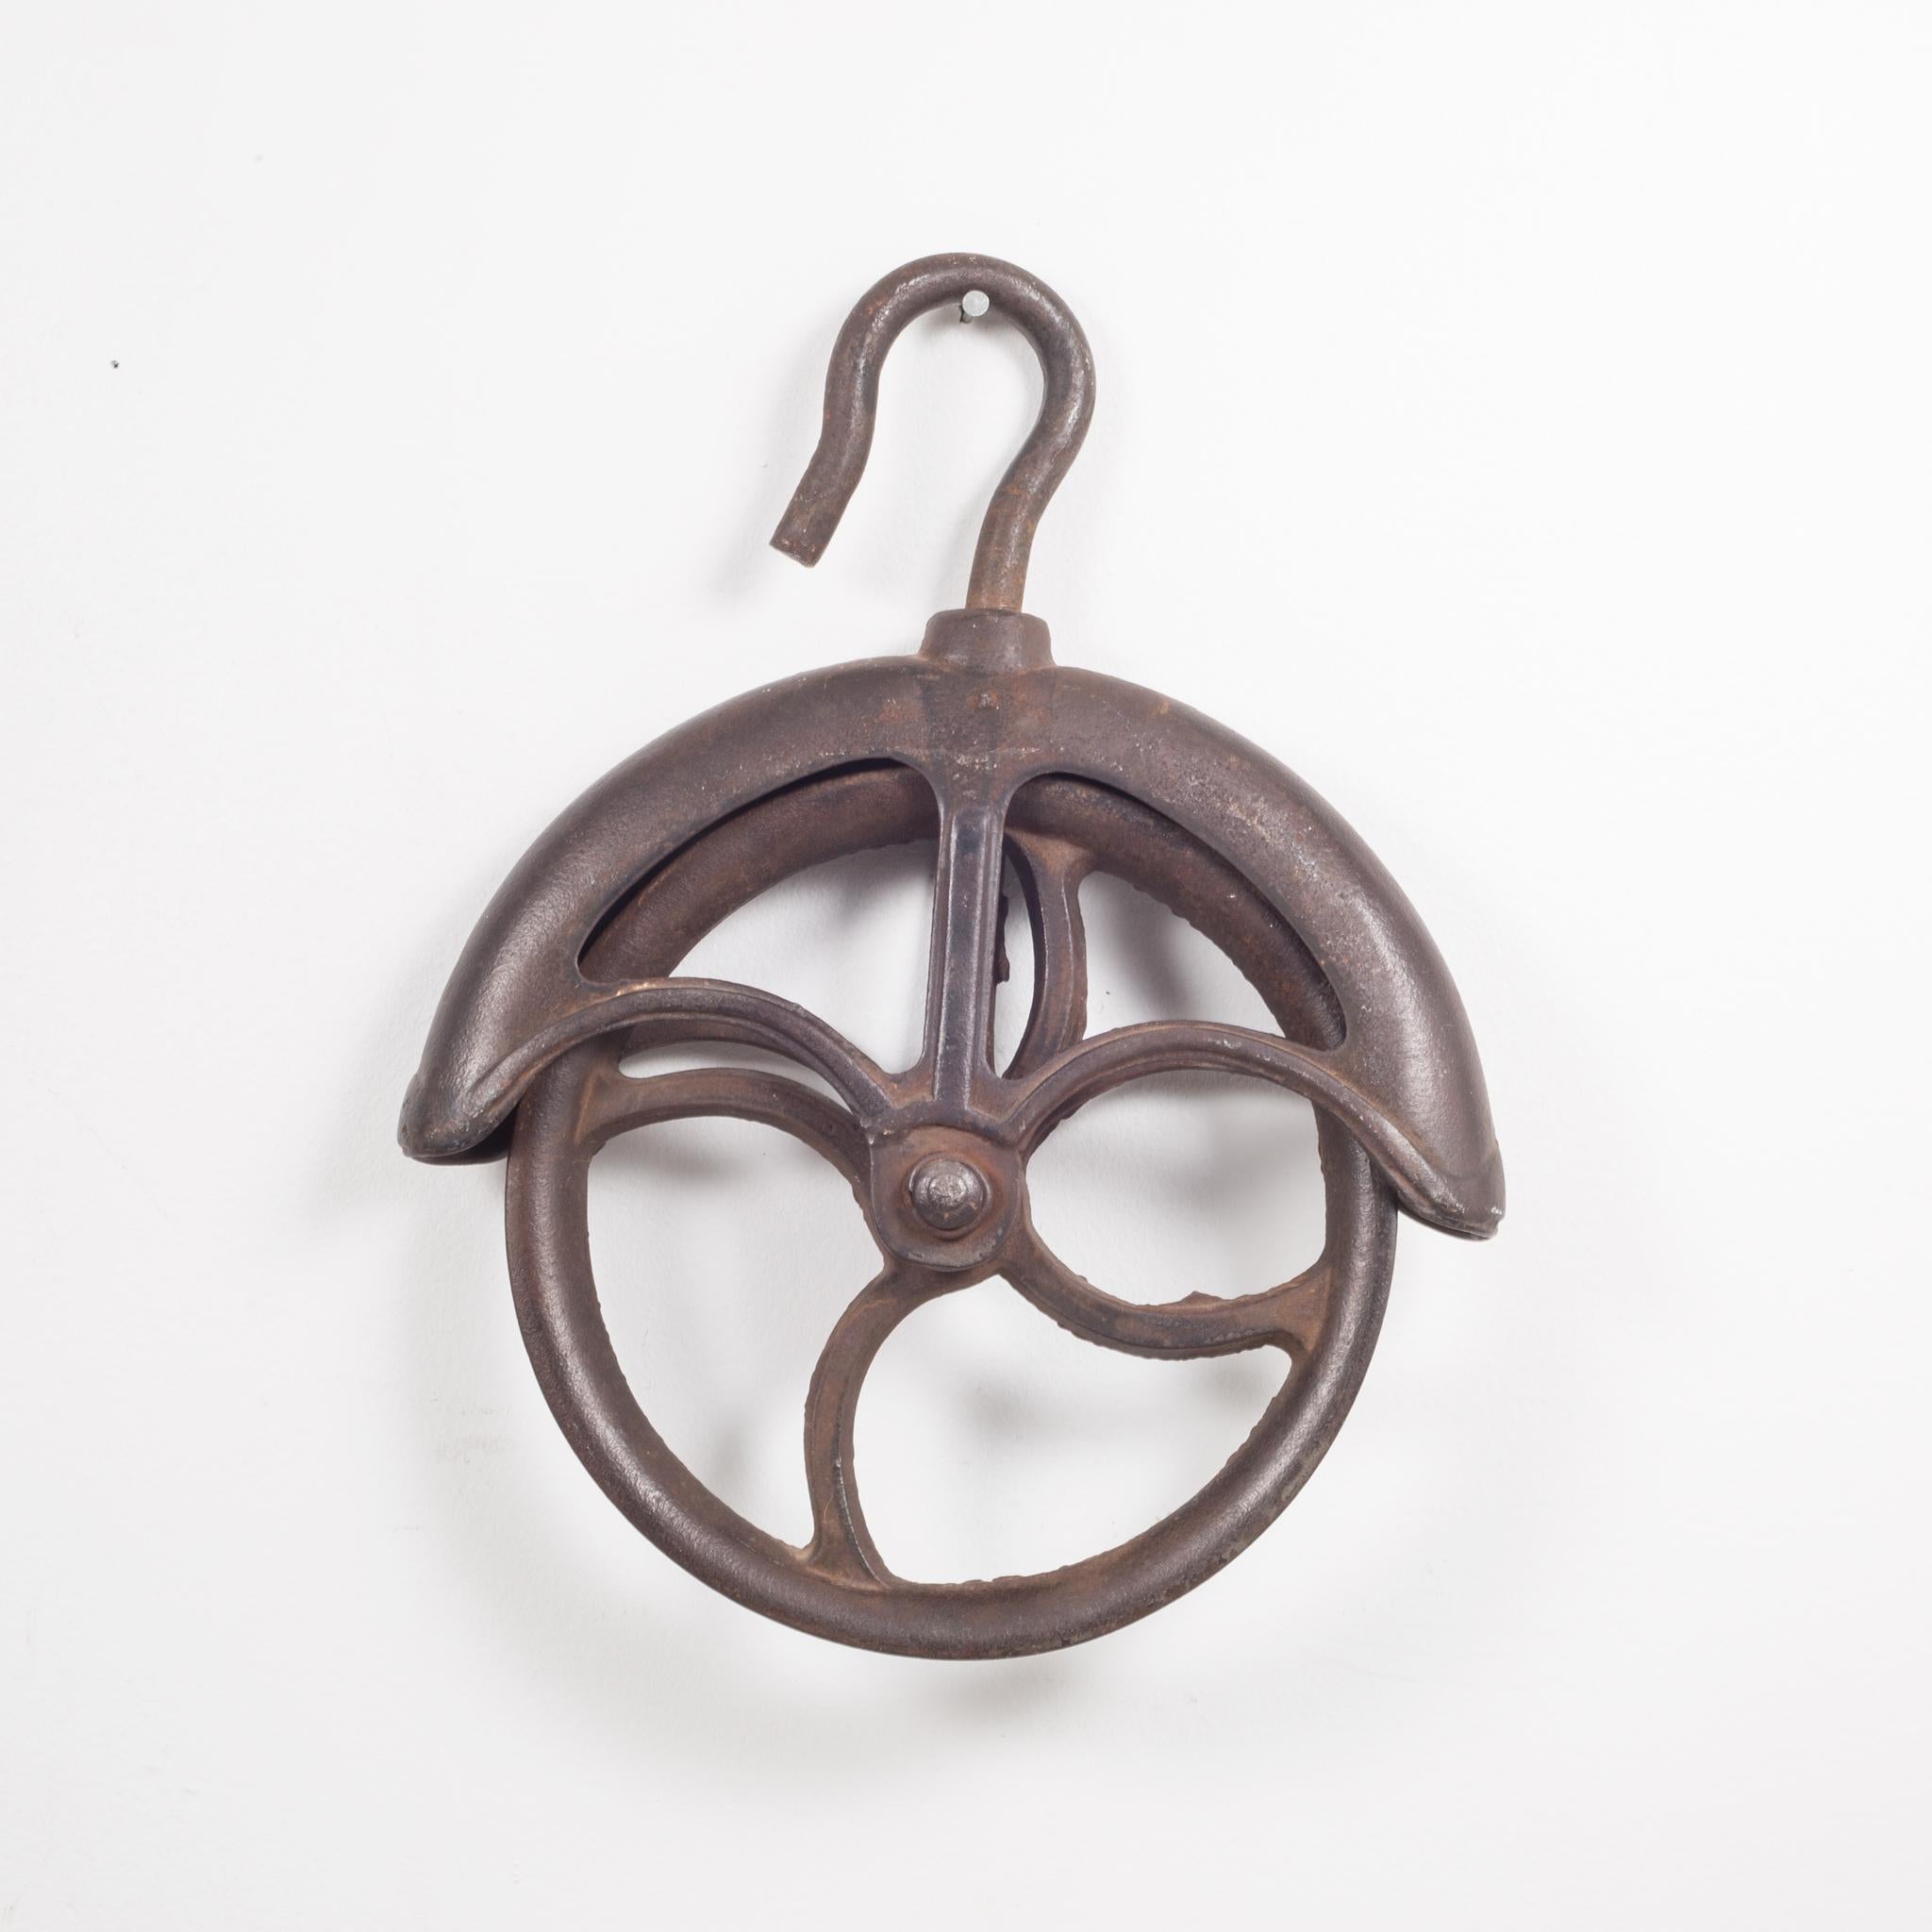 ABOUT

A metal barn pulley with rotating hook.

 CREATOR Unknown.
 DATE OF MANUFACTURE c.1940-1960.
 MATERIALS AND TECHNIQUES Iron.
 CONDITION Good. Wear consistent with age and use.
 DIMENSIONS H 11.75 in. W 9 in. D 1.5